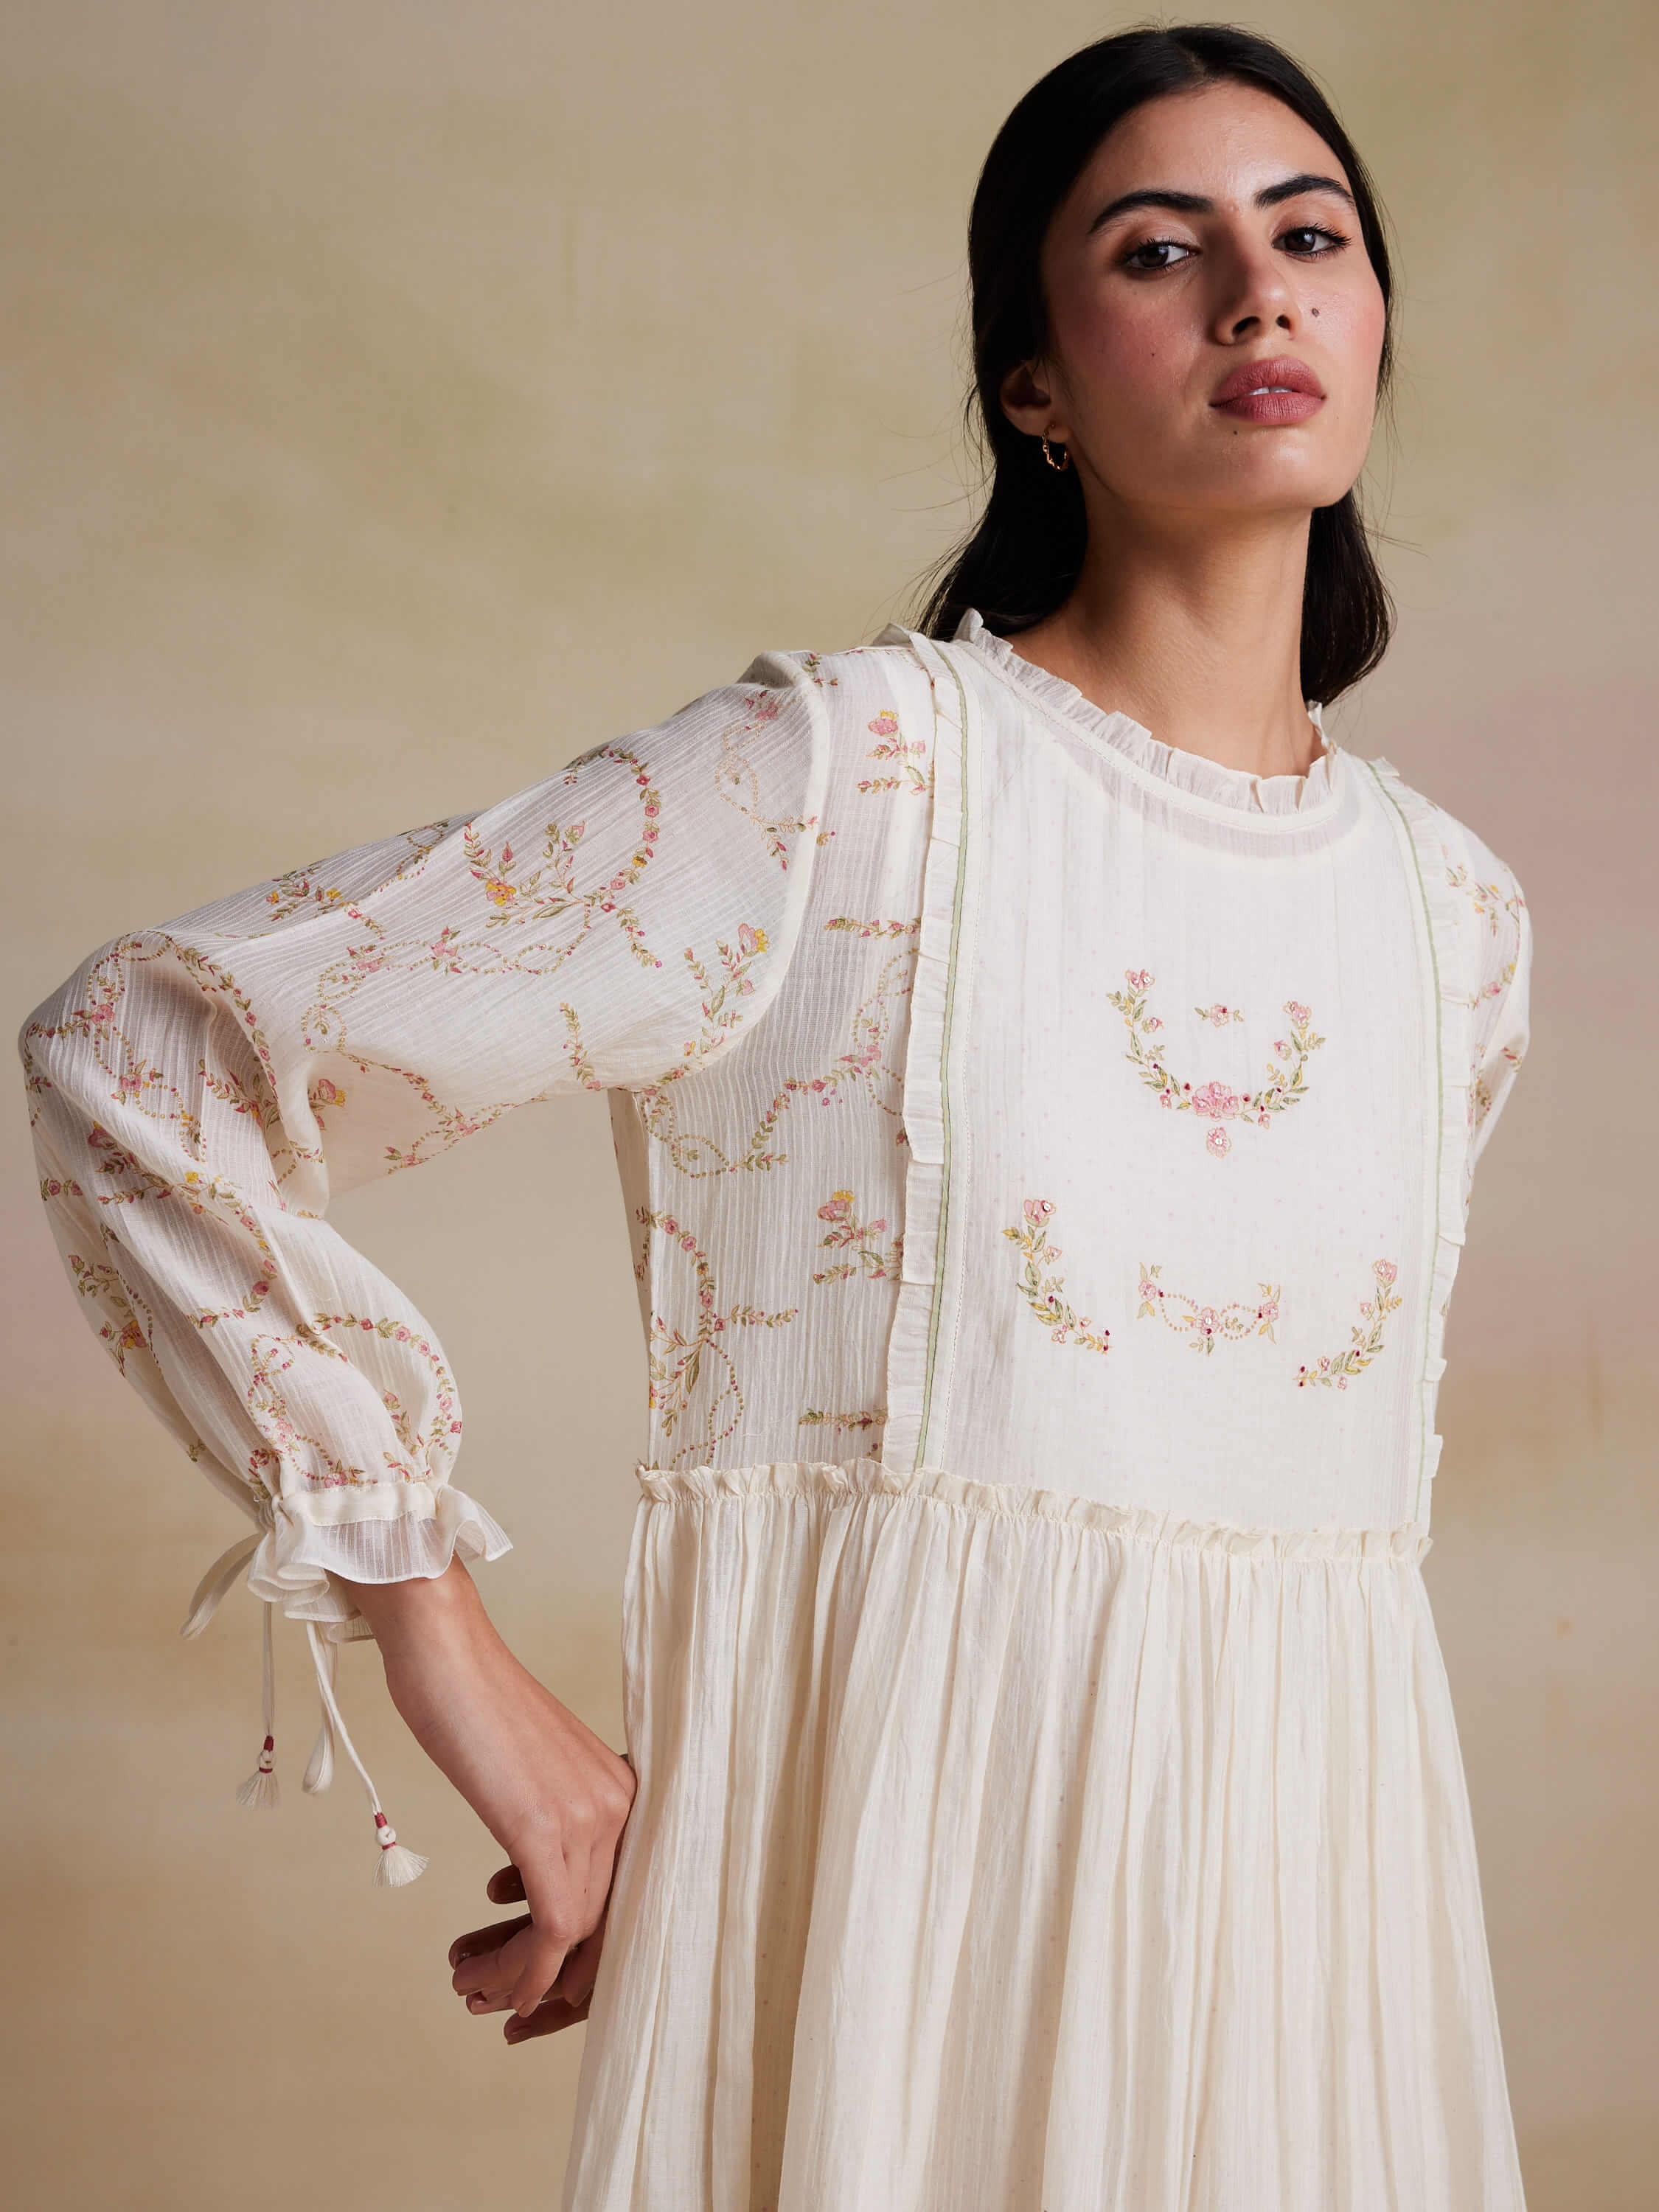 Woman in white, floral-embroidered dress posing fashion portrait.